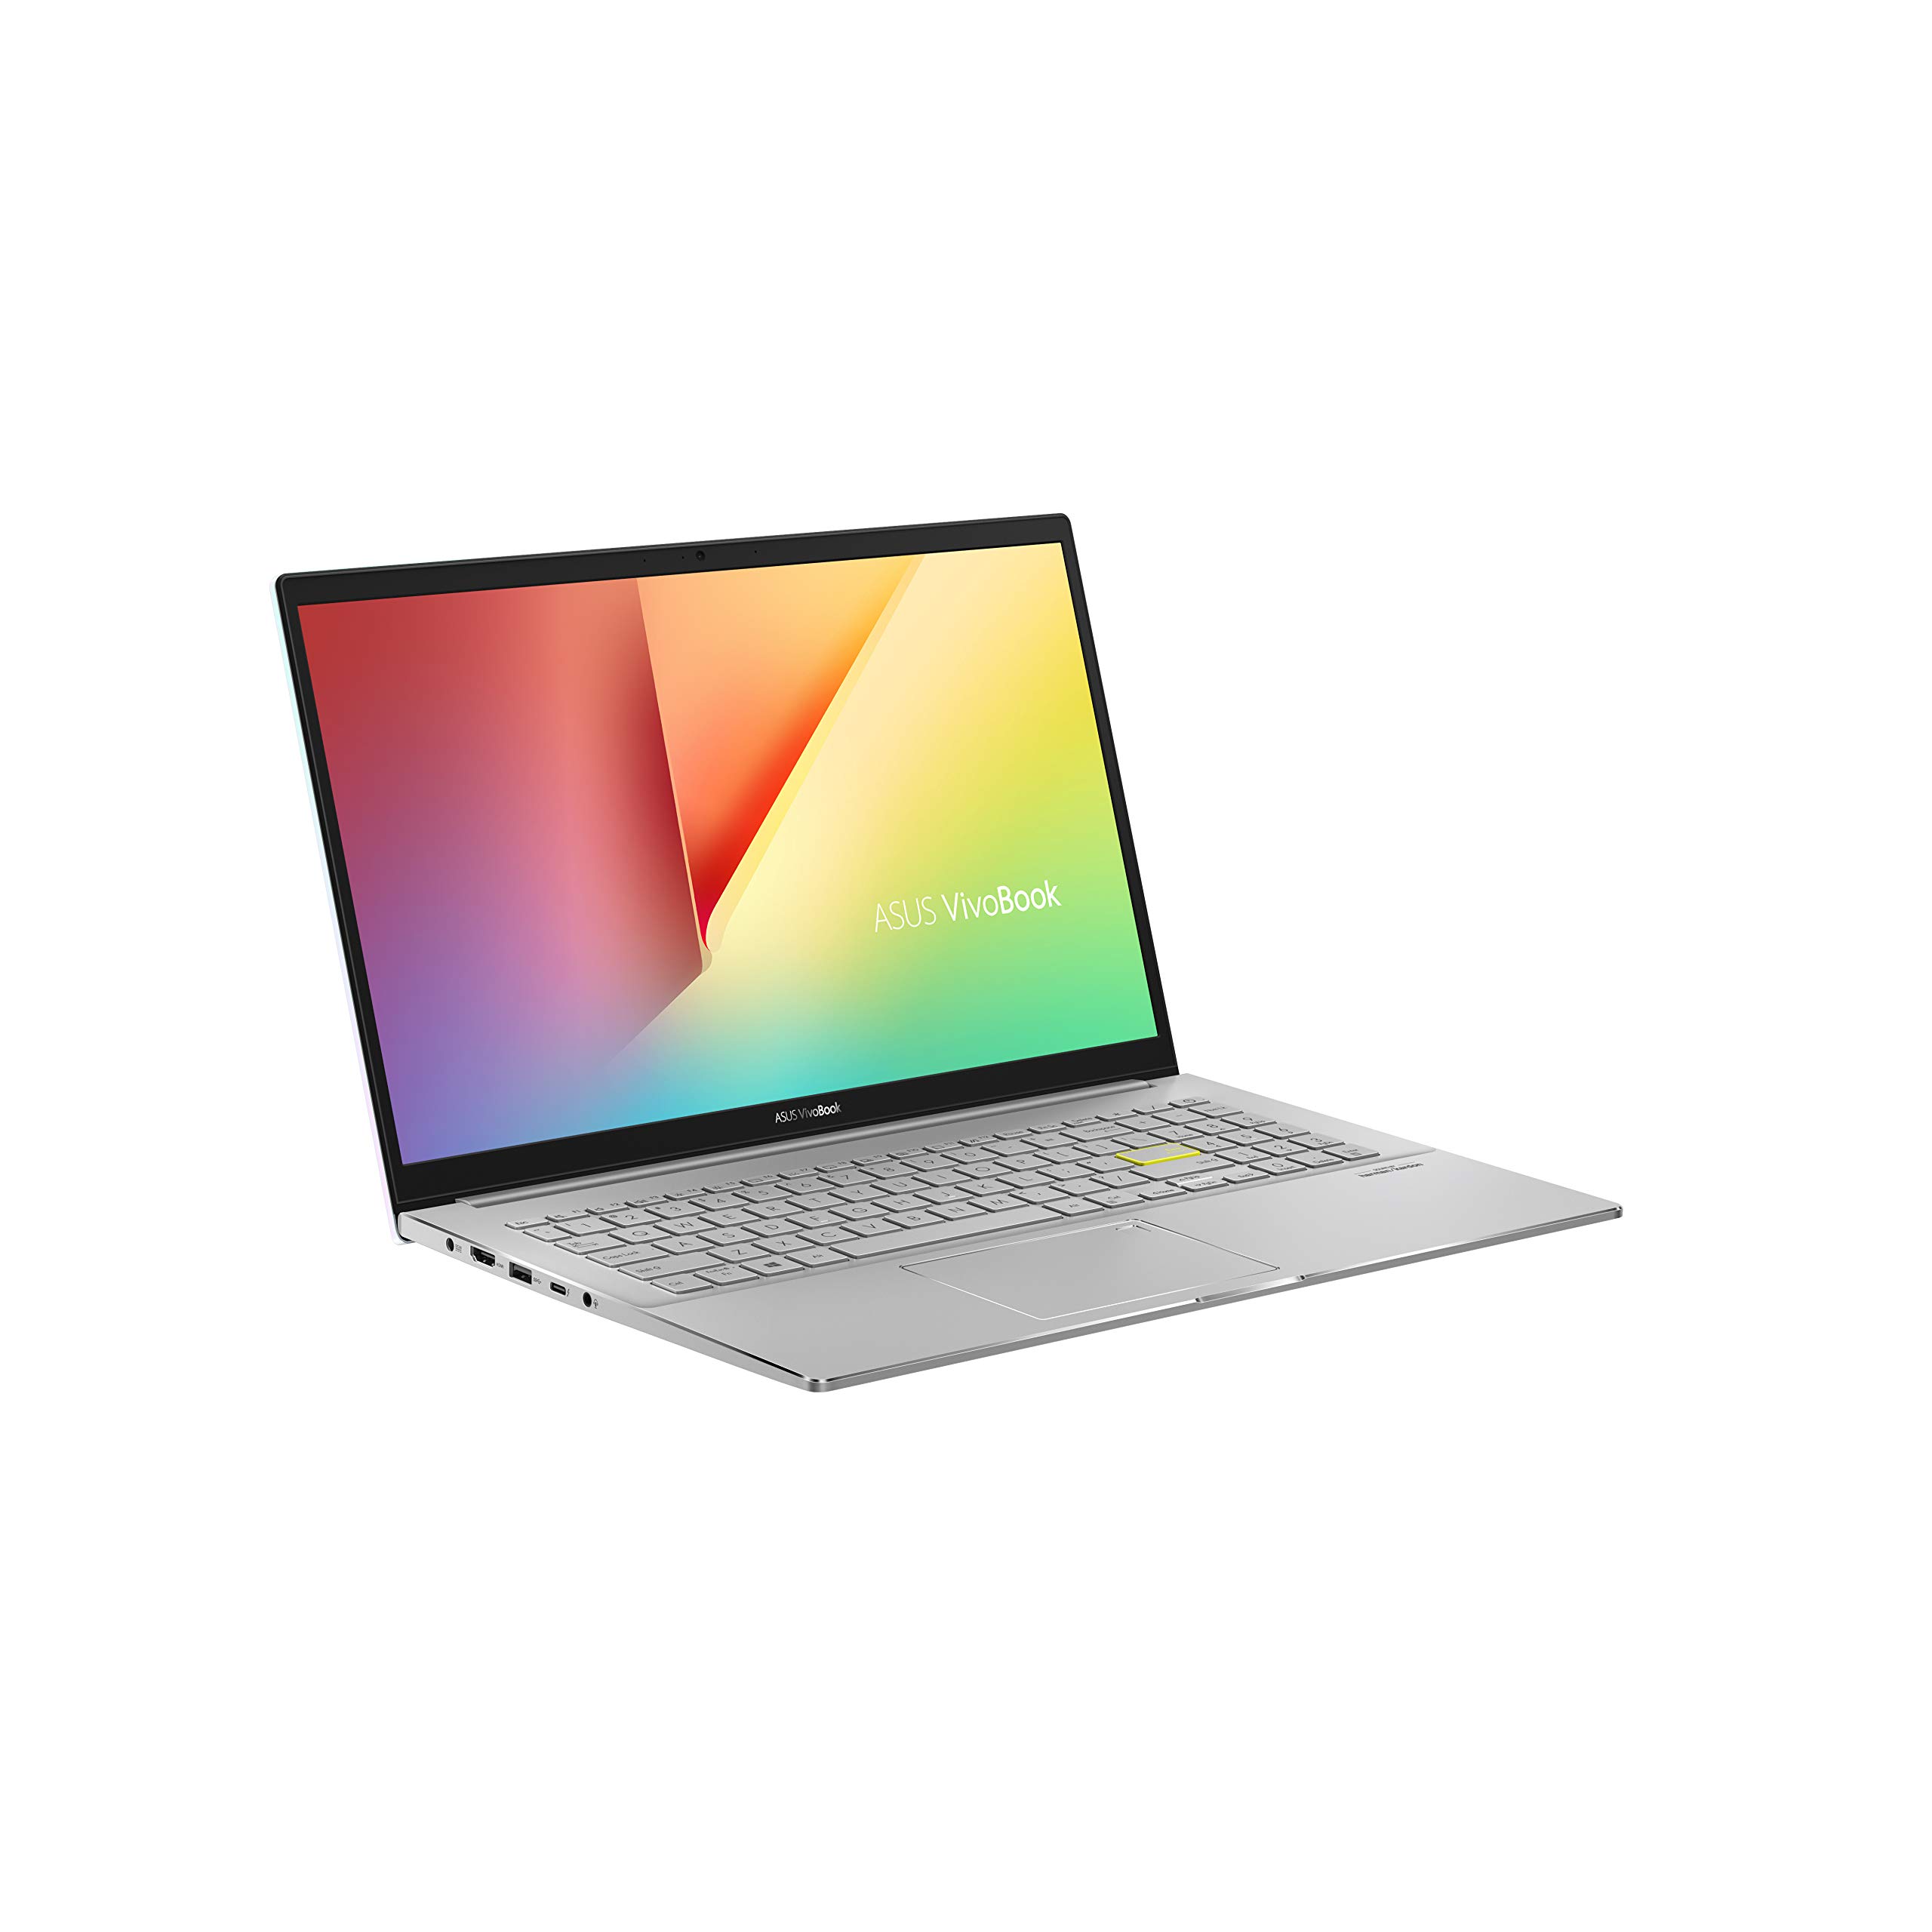 ASUS VivoBook S15 S533 Thin and Light Laptop, 15.6” FHD Display, Intel Core i5-1135G7, 8GB DDR4 RAM, 512GB PCIe SSD, Wi-Fi 6, Windows 10 Home, AI noise-cancellation, Dreamy White, S533EA-DH51-WH